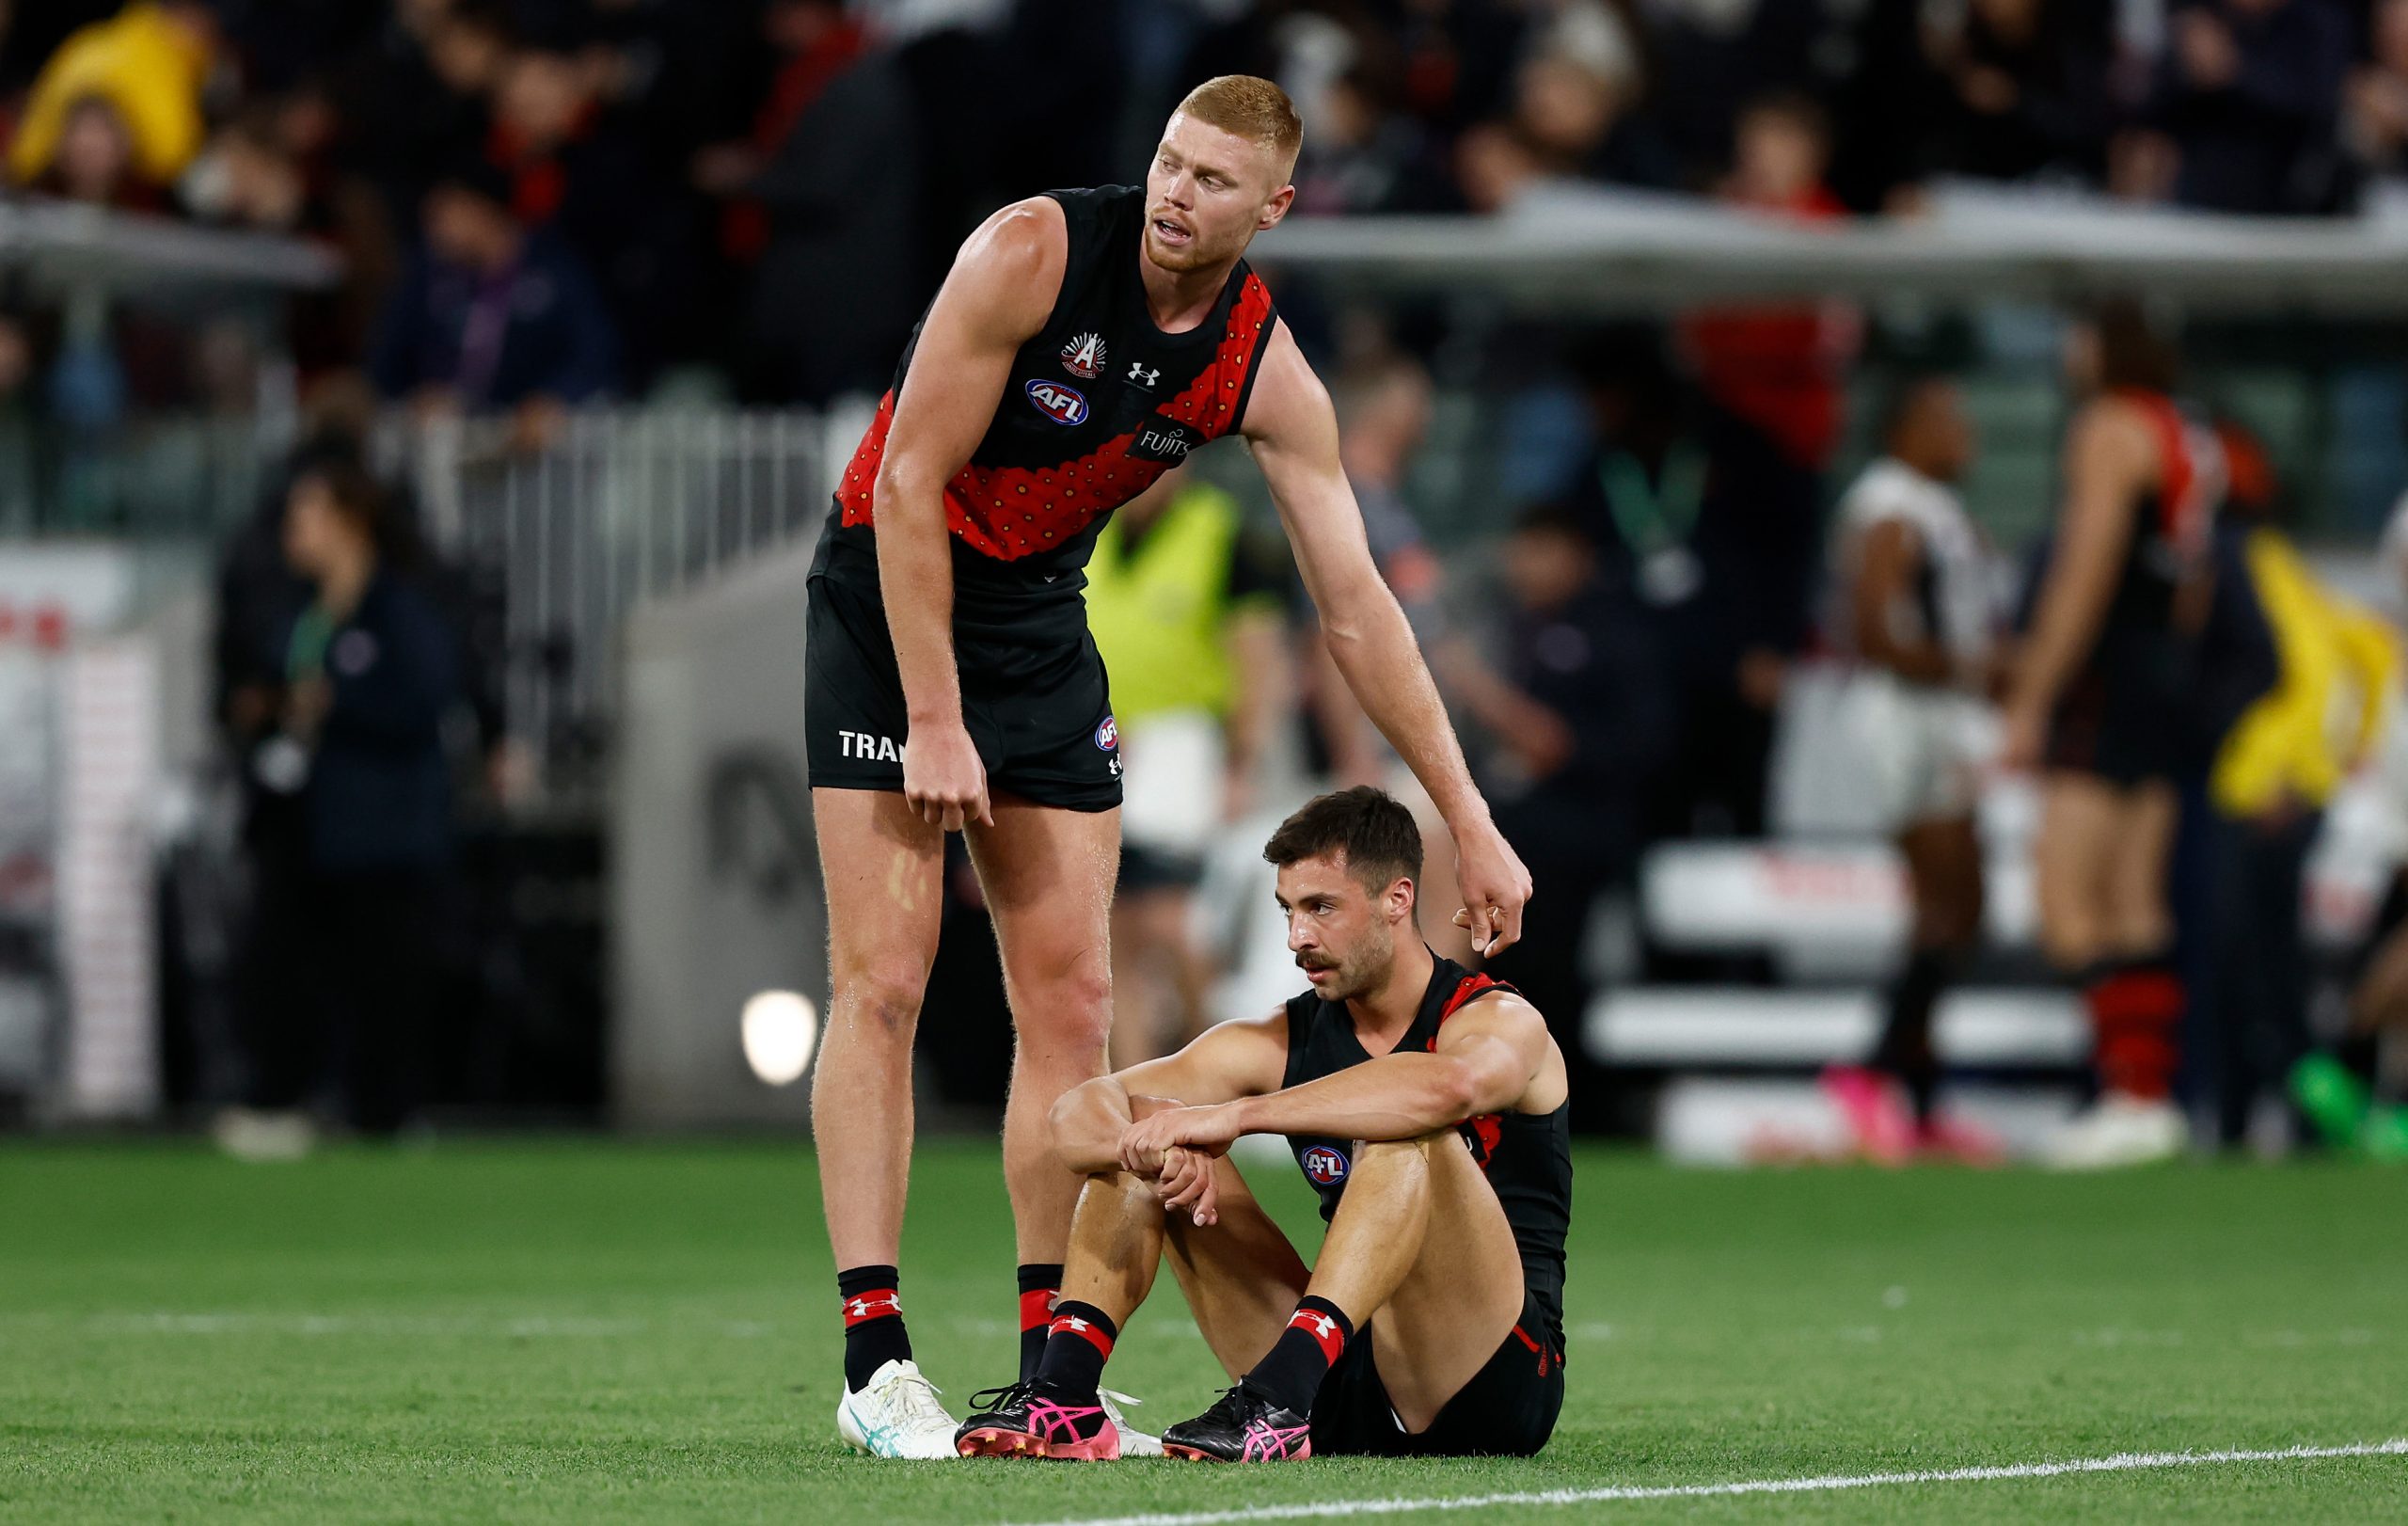 Langford missed a winning goal for the Bombers.